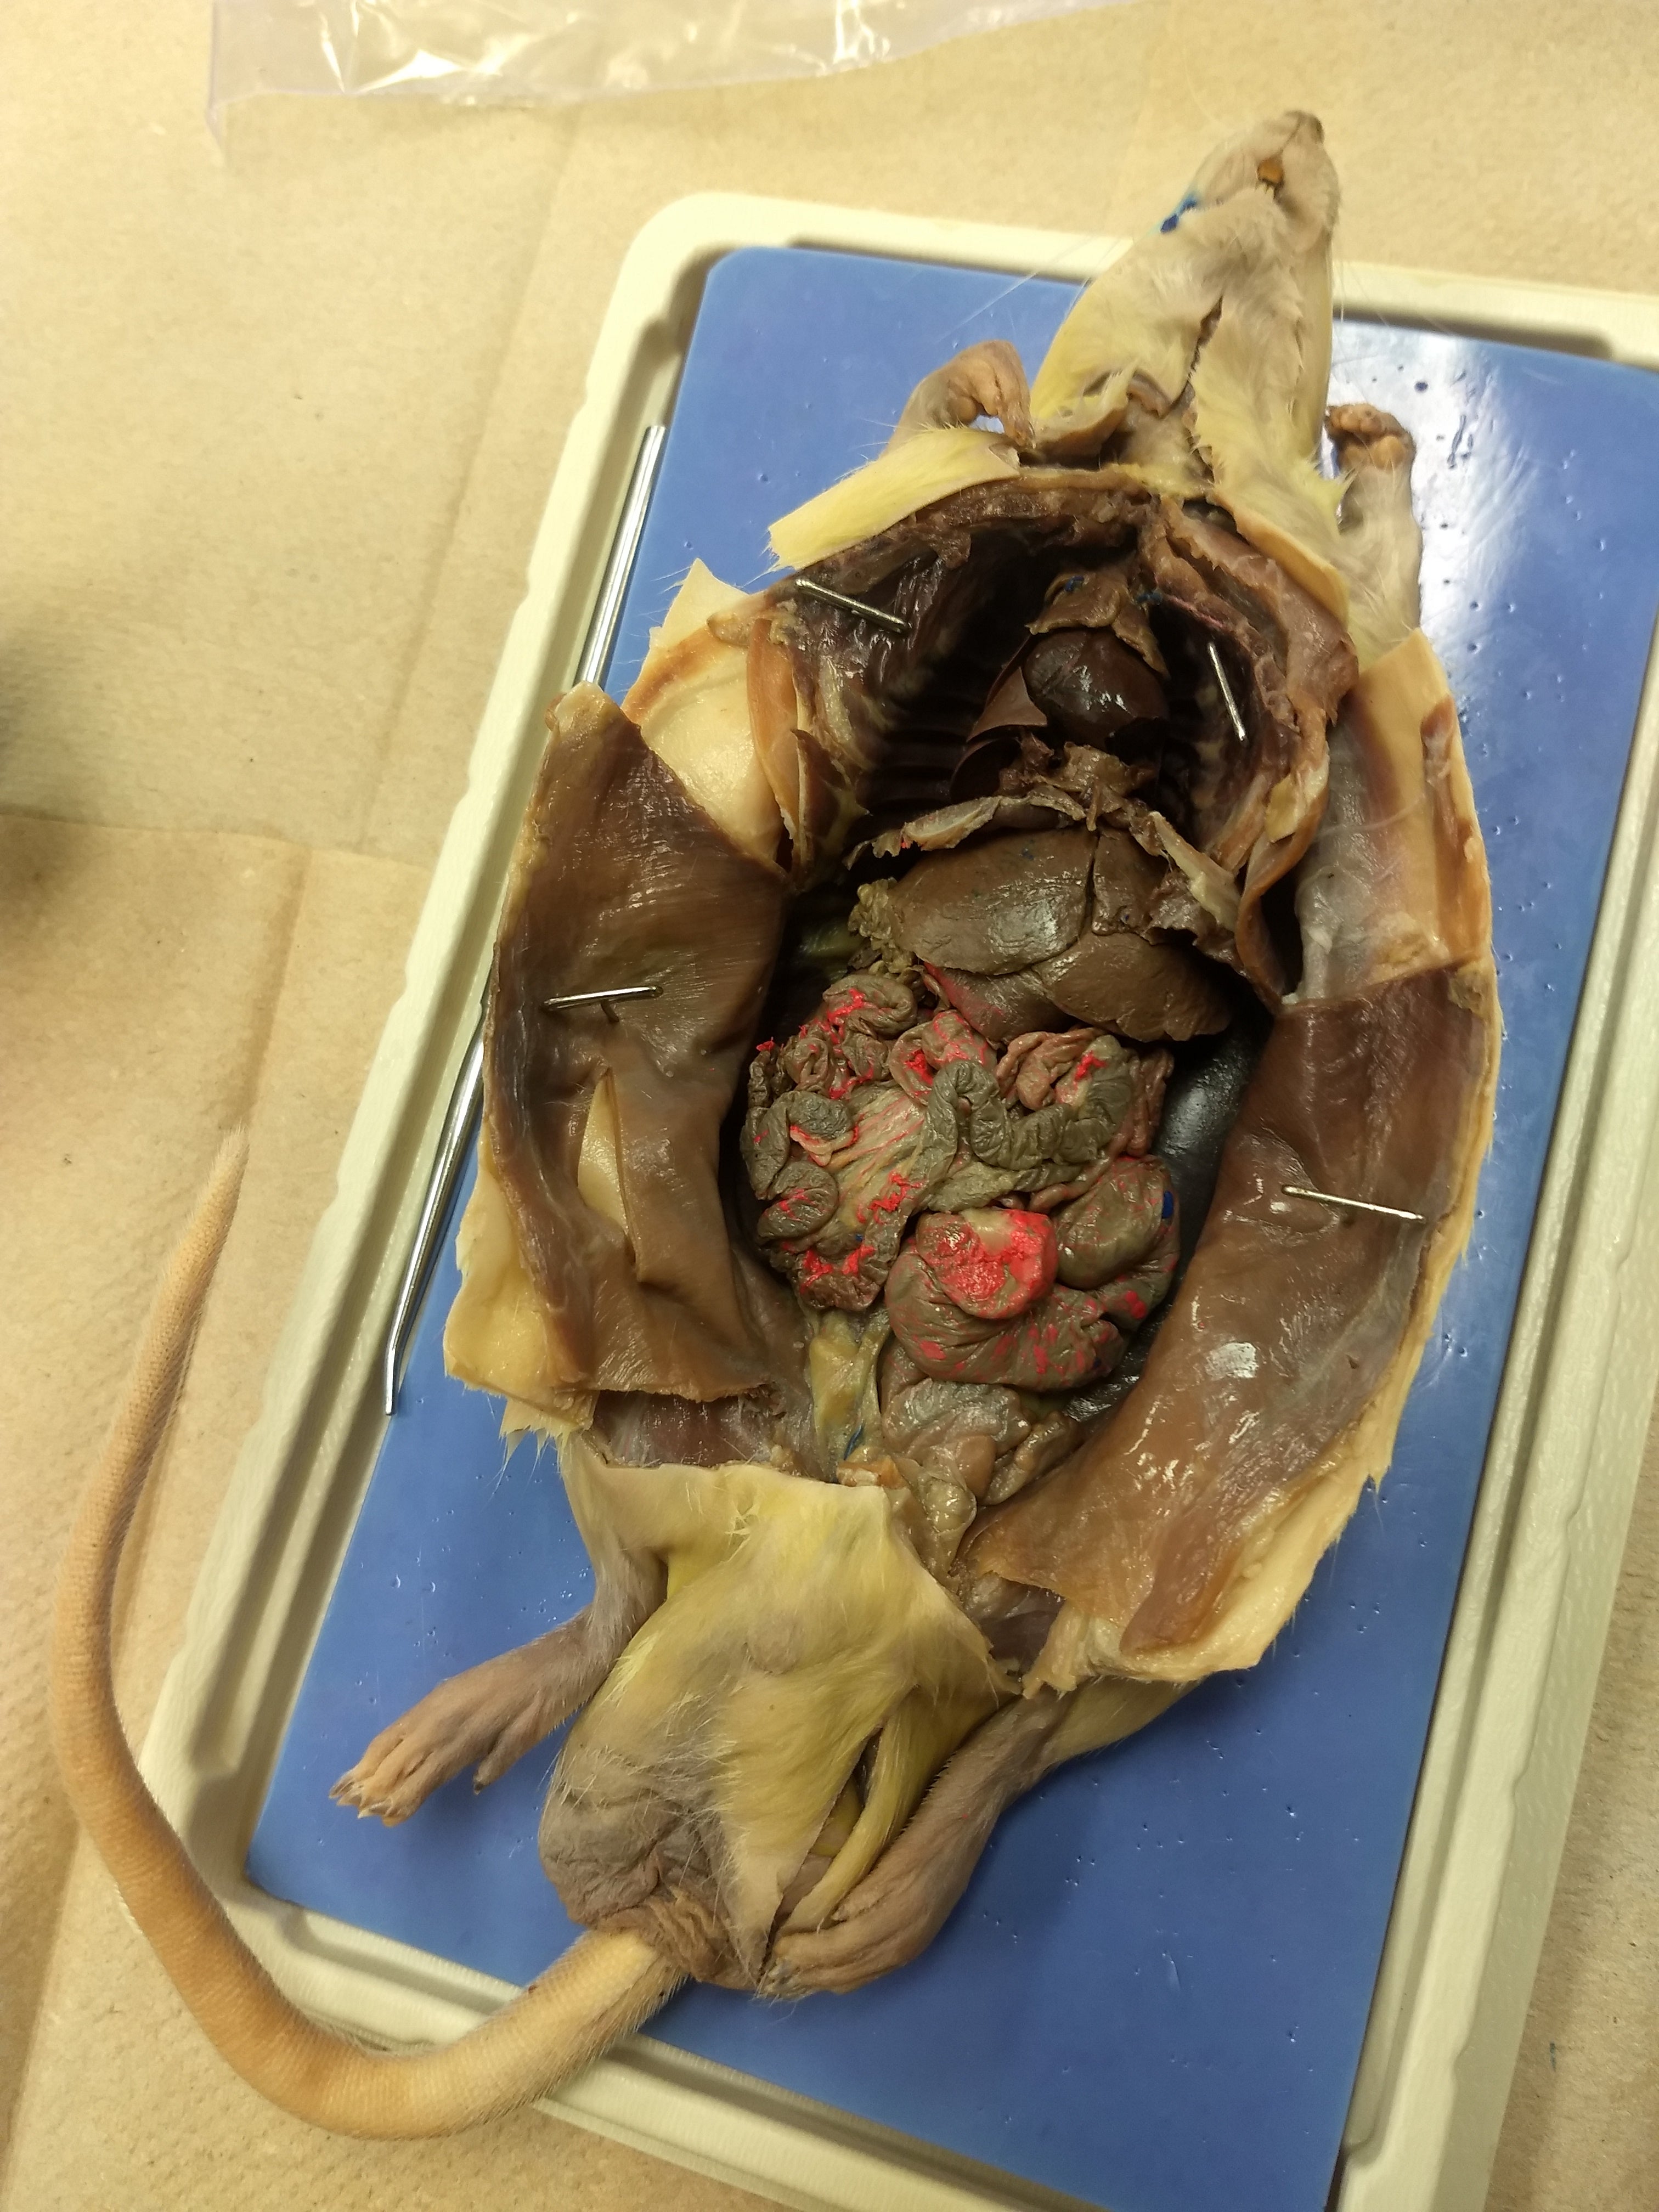 Dissecting a rat